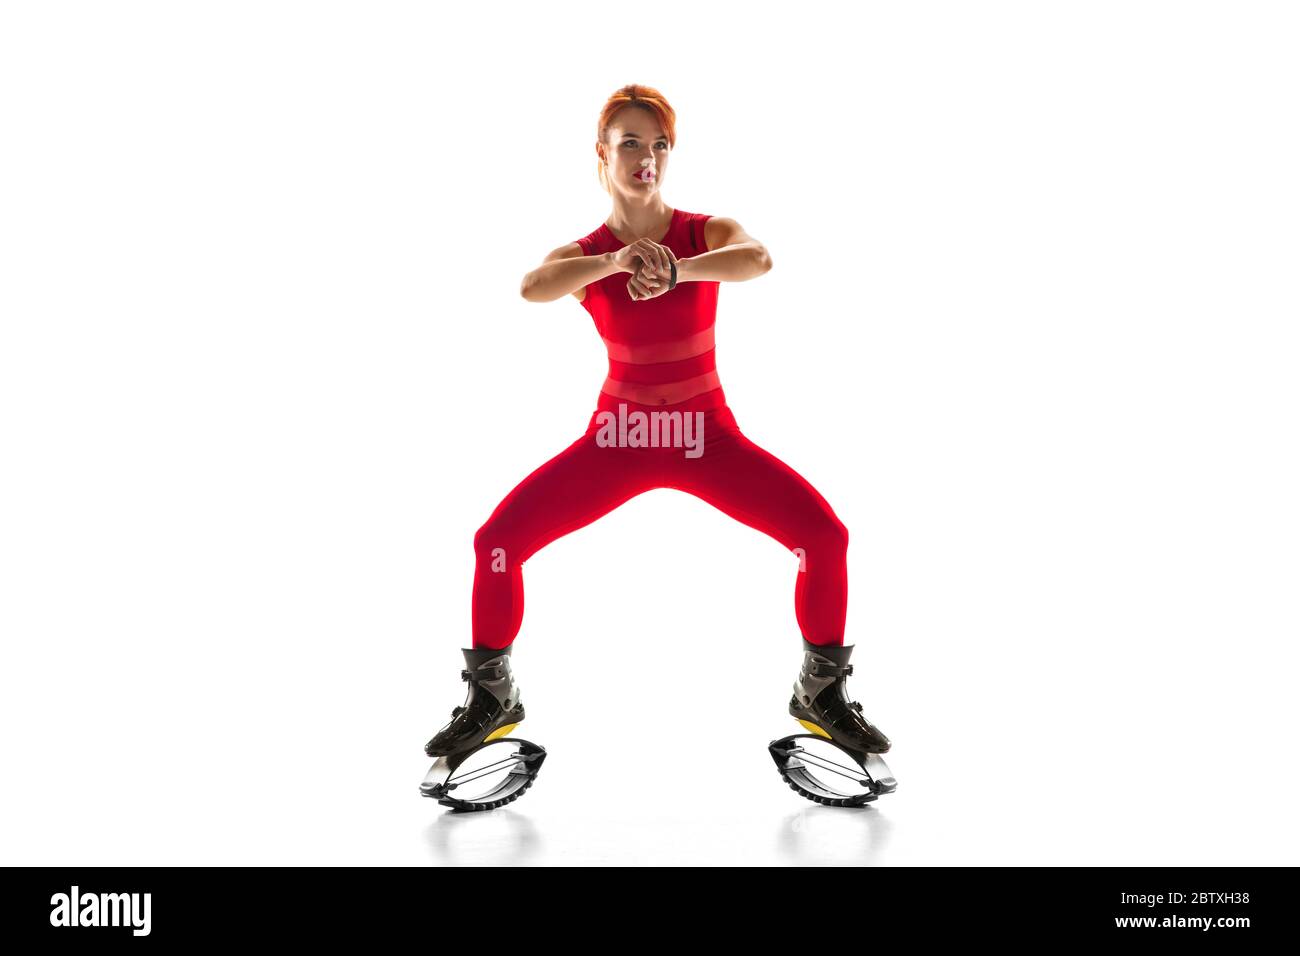 Kangoo jumps boots Free Stock Photos, Images, and Pictures of Kangoo jumps  boots